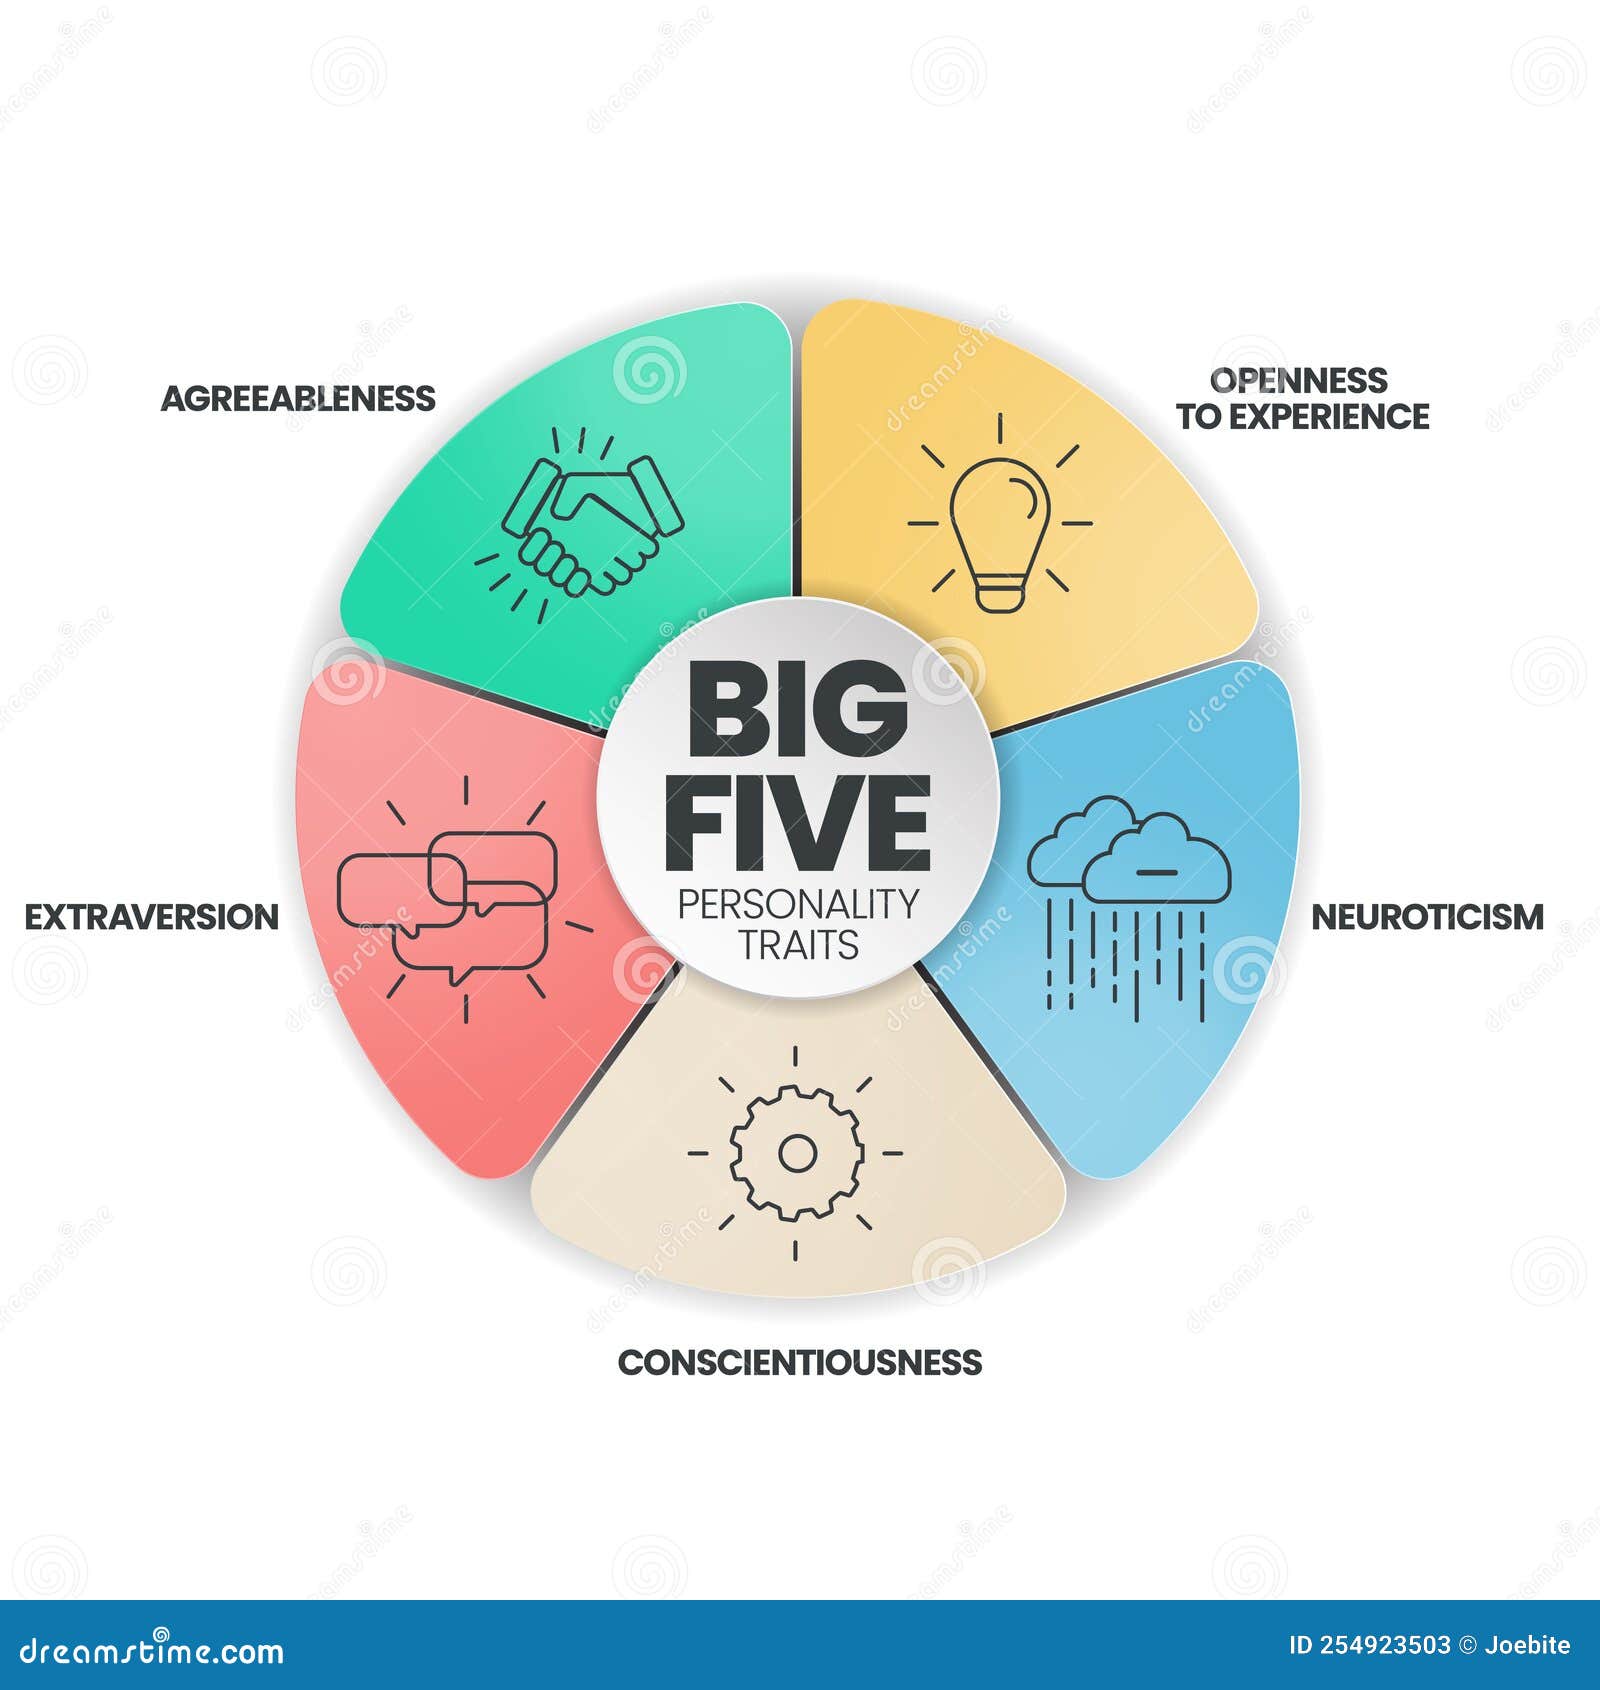 Big Five Personality Traits Infographic Has 4 Types of Personality Such